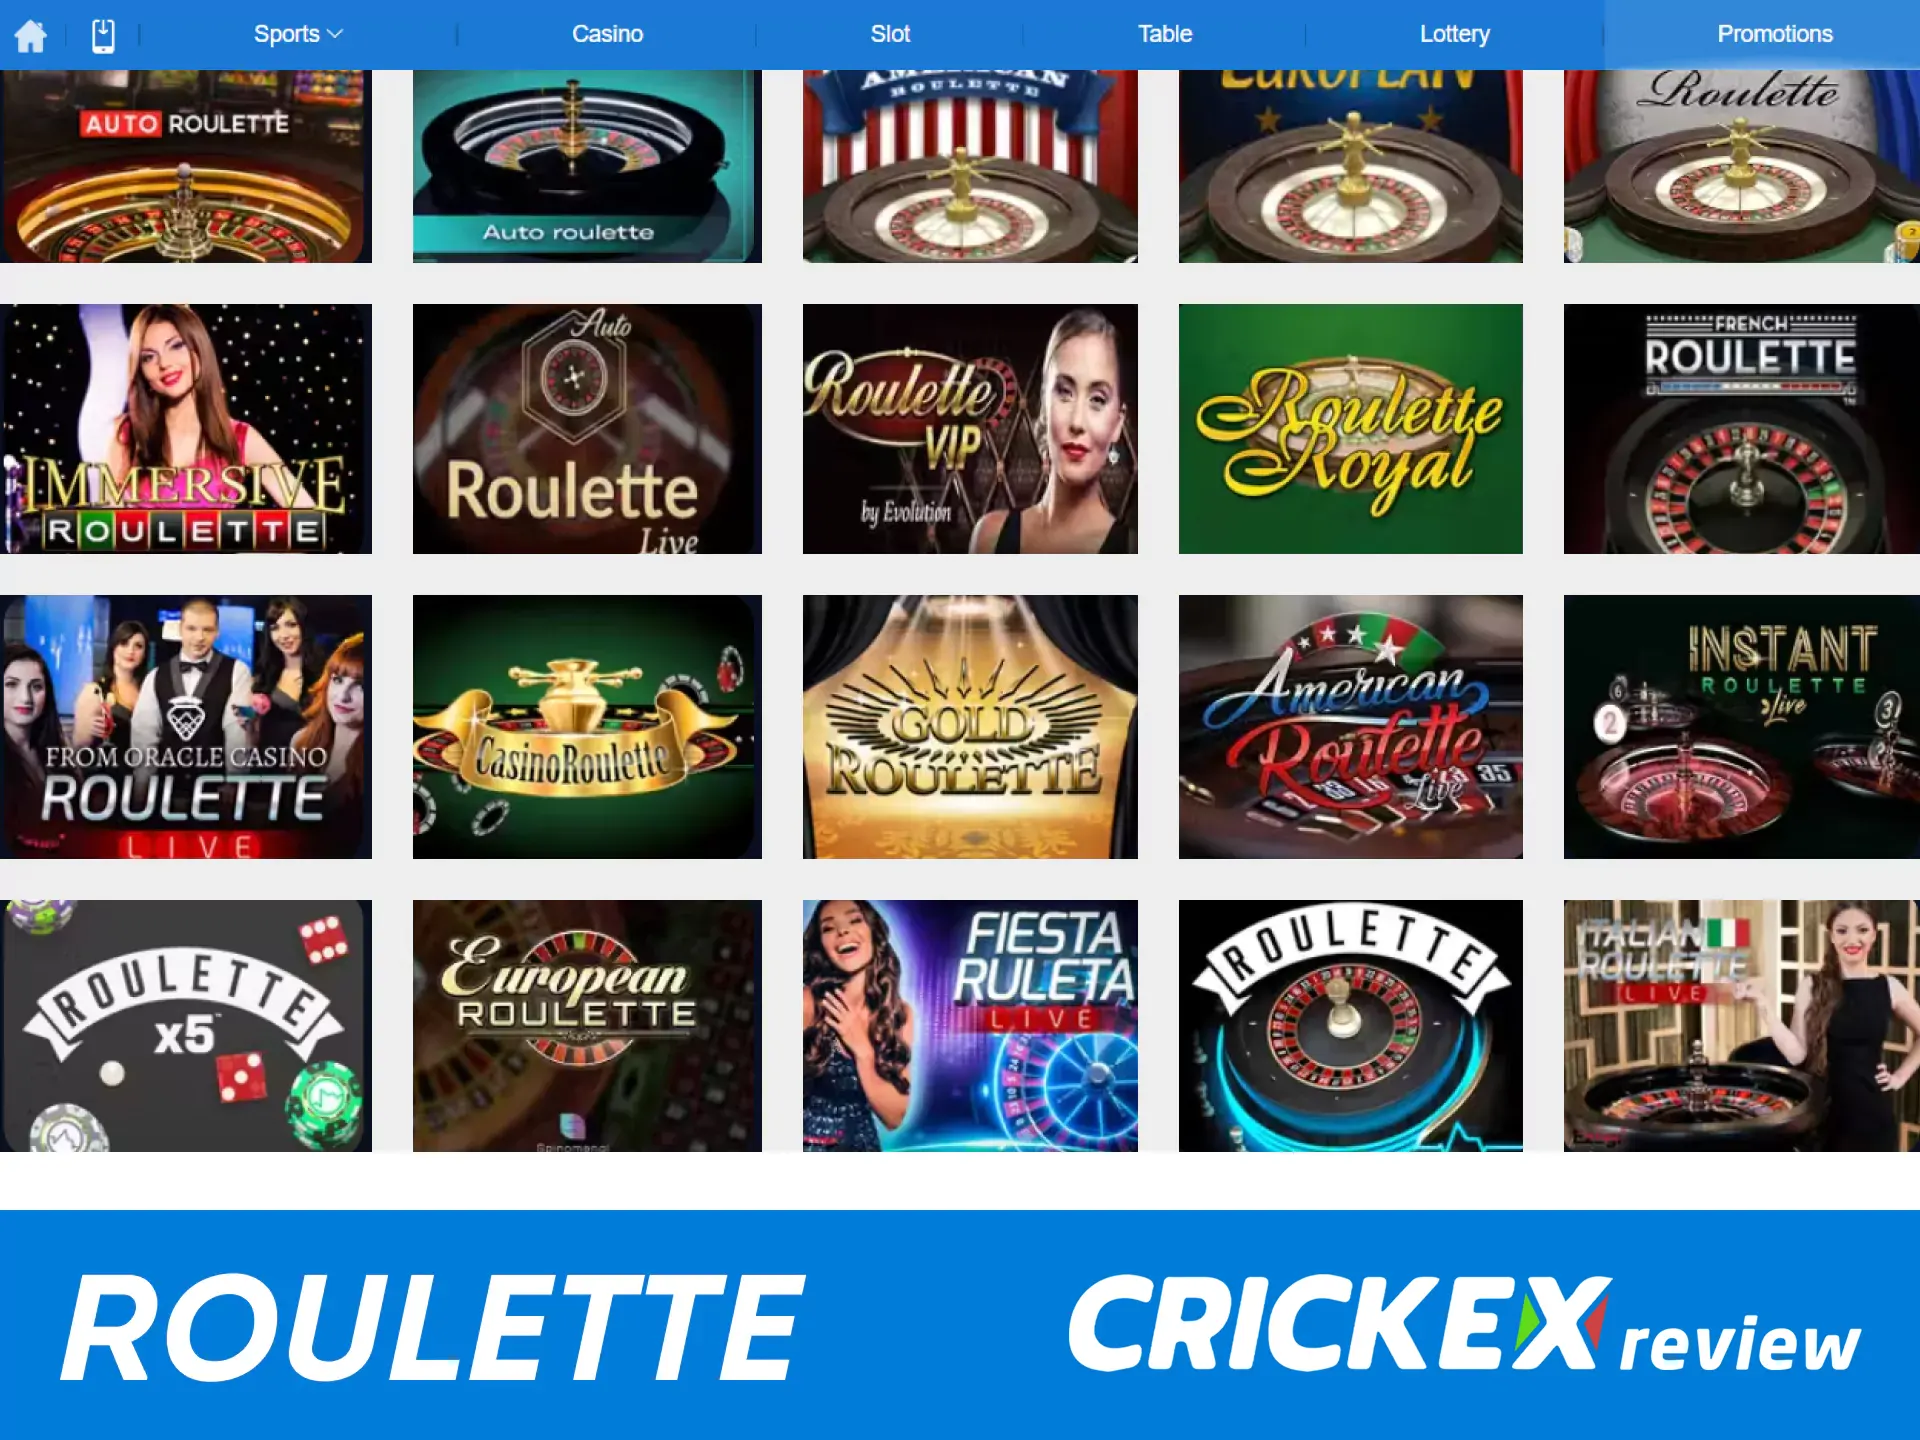 For casino games, choose roulette from Crickex.